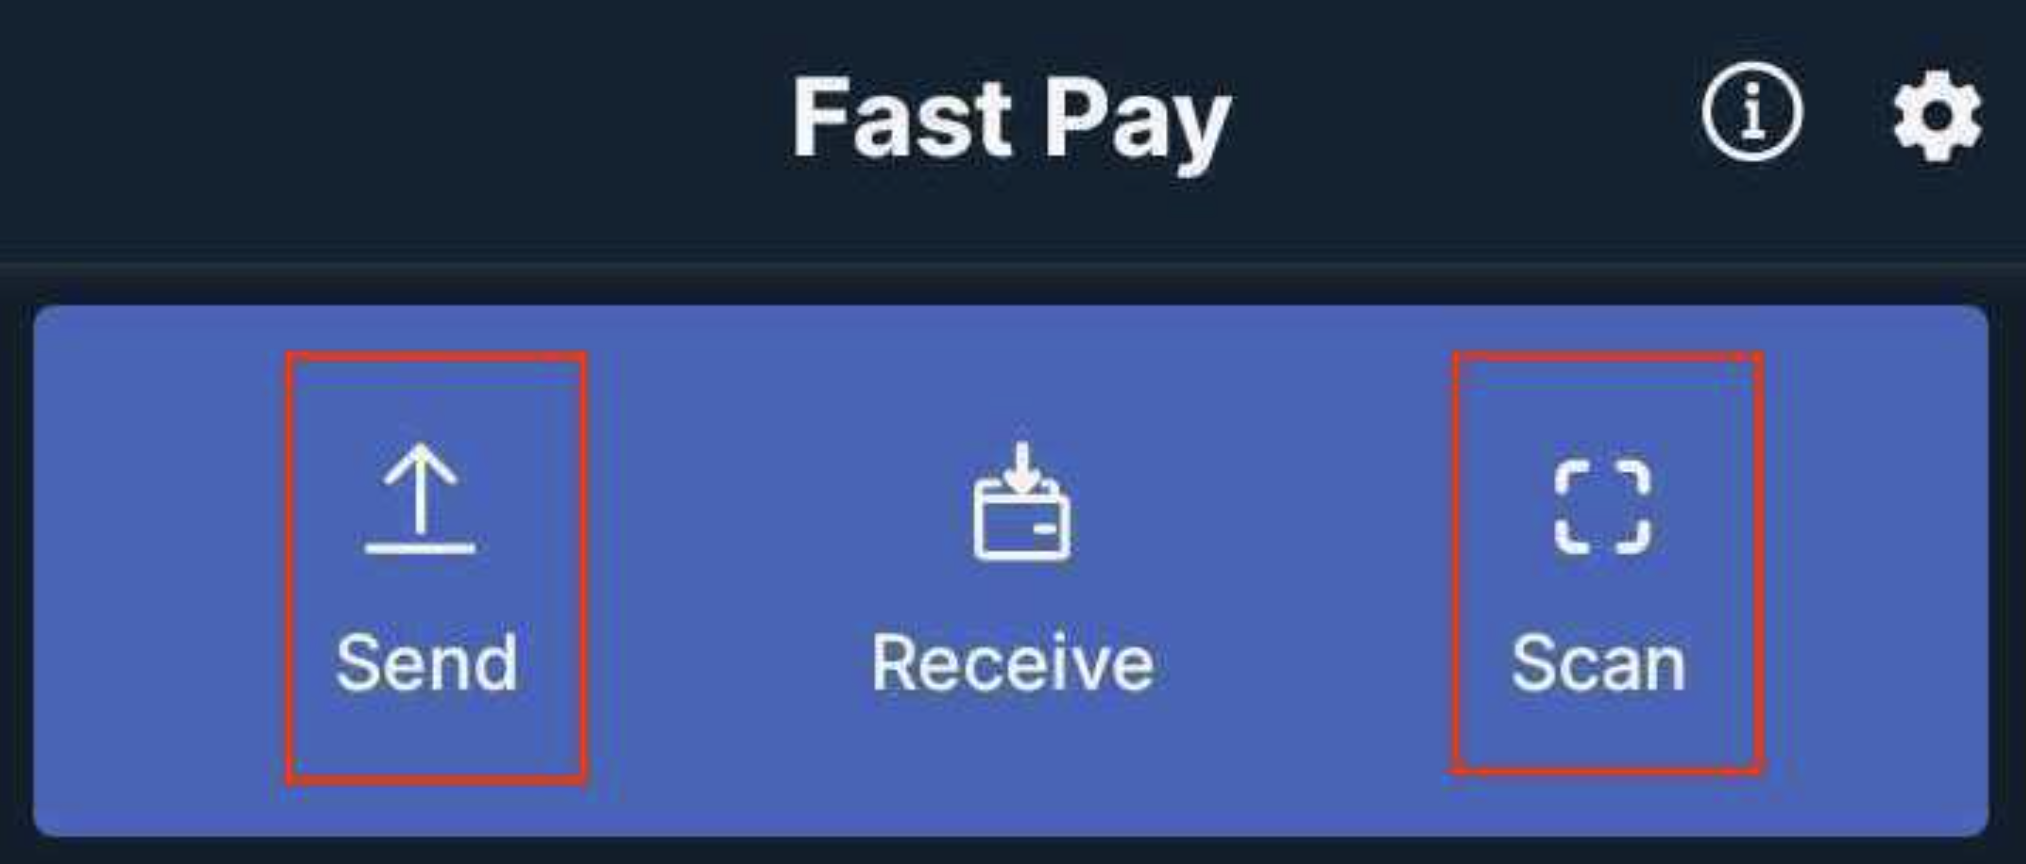 fastpay2.png